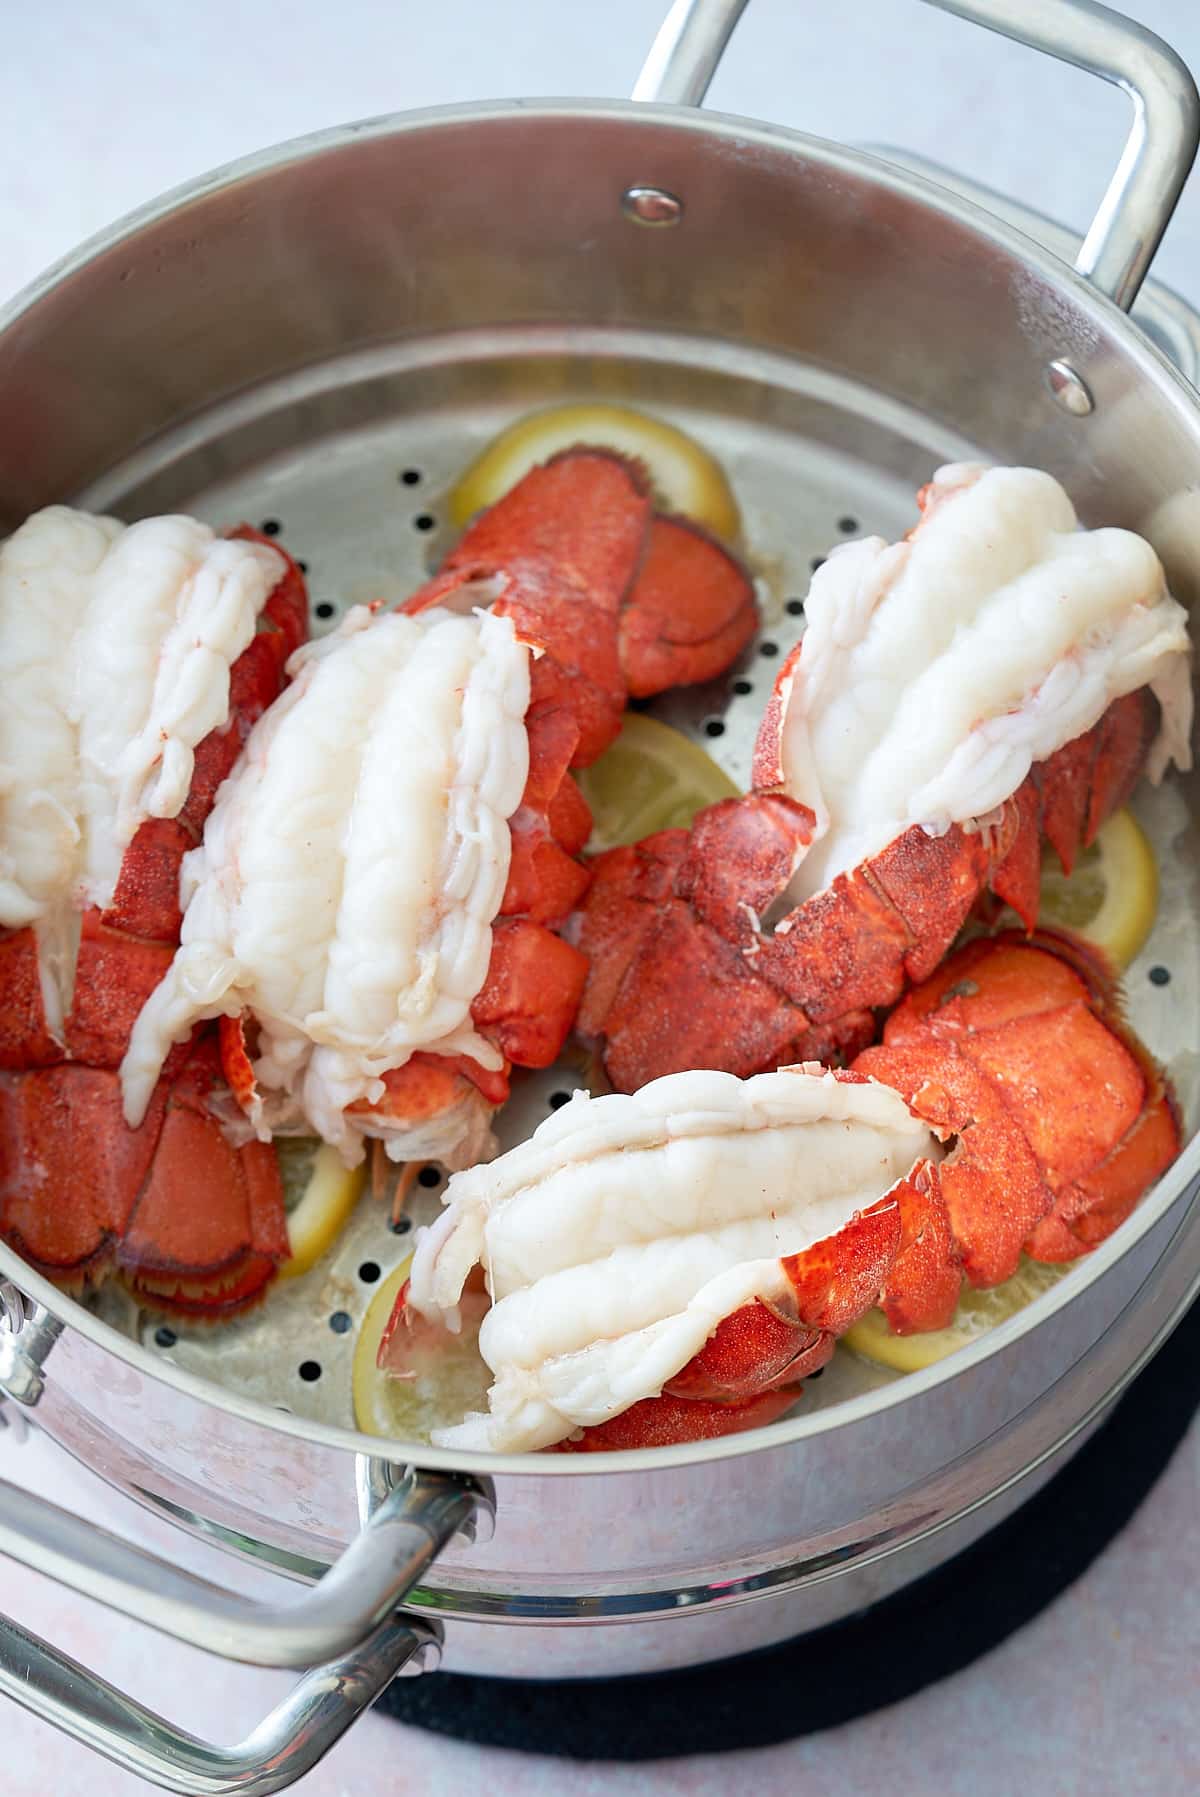 Four cooked lobster tails sitting in a steamer on top of slices of lemon.